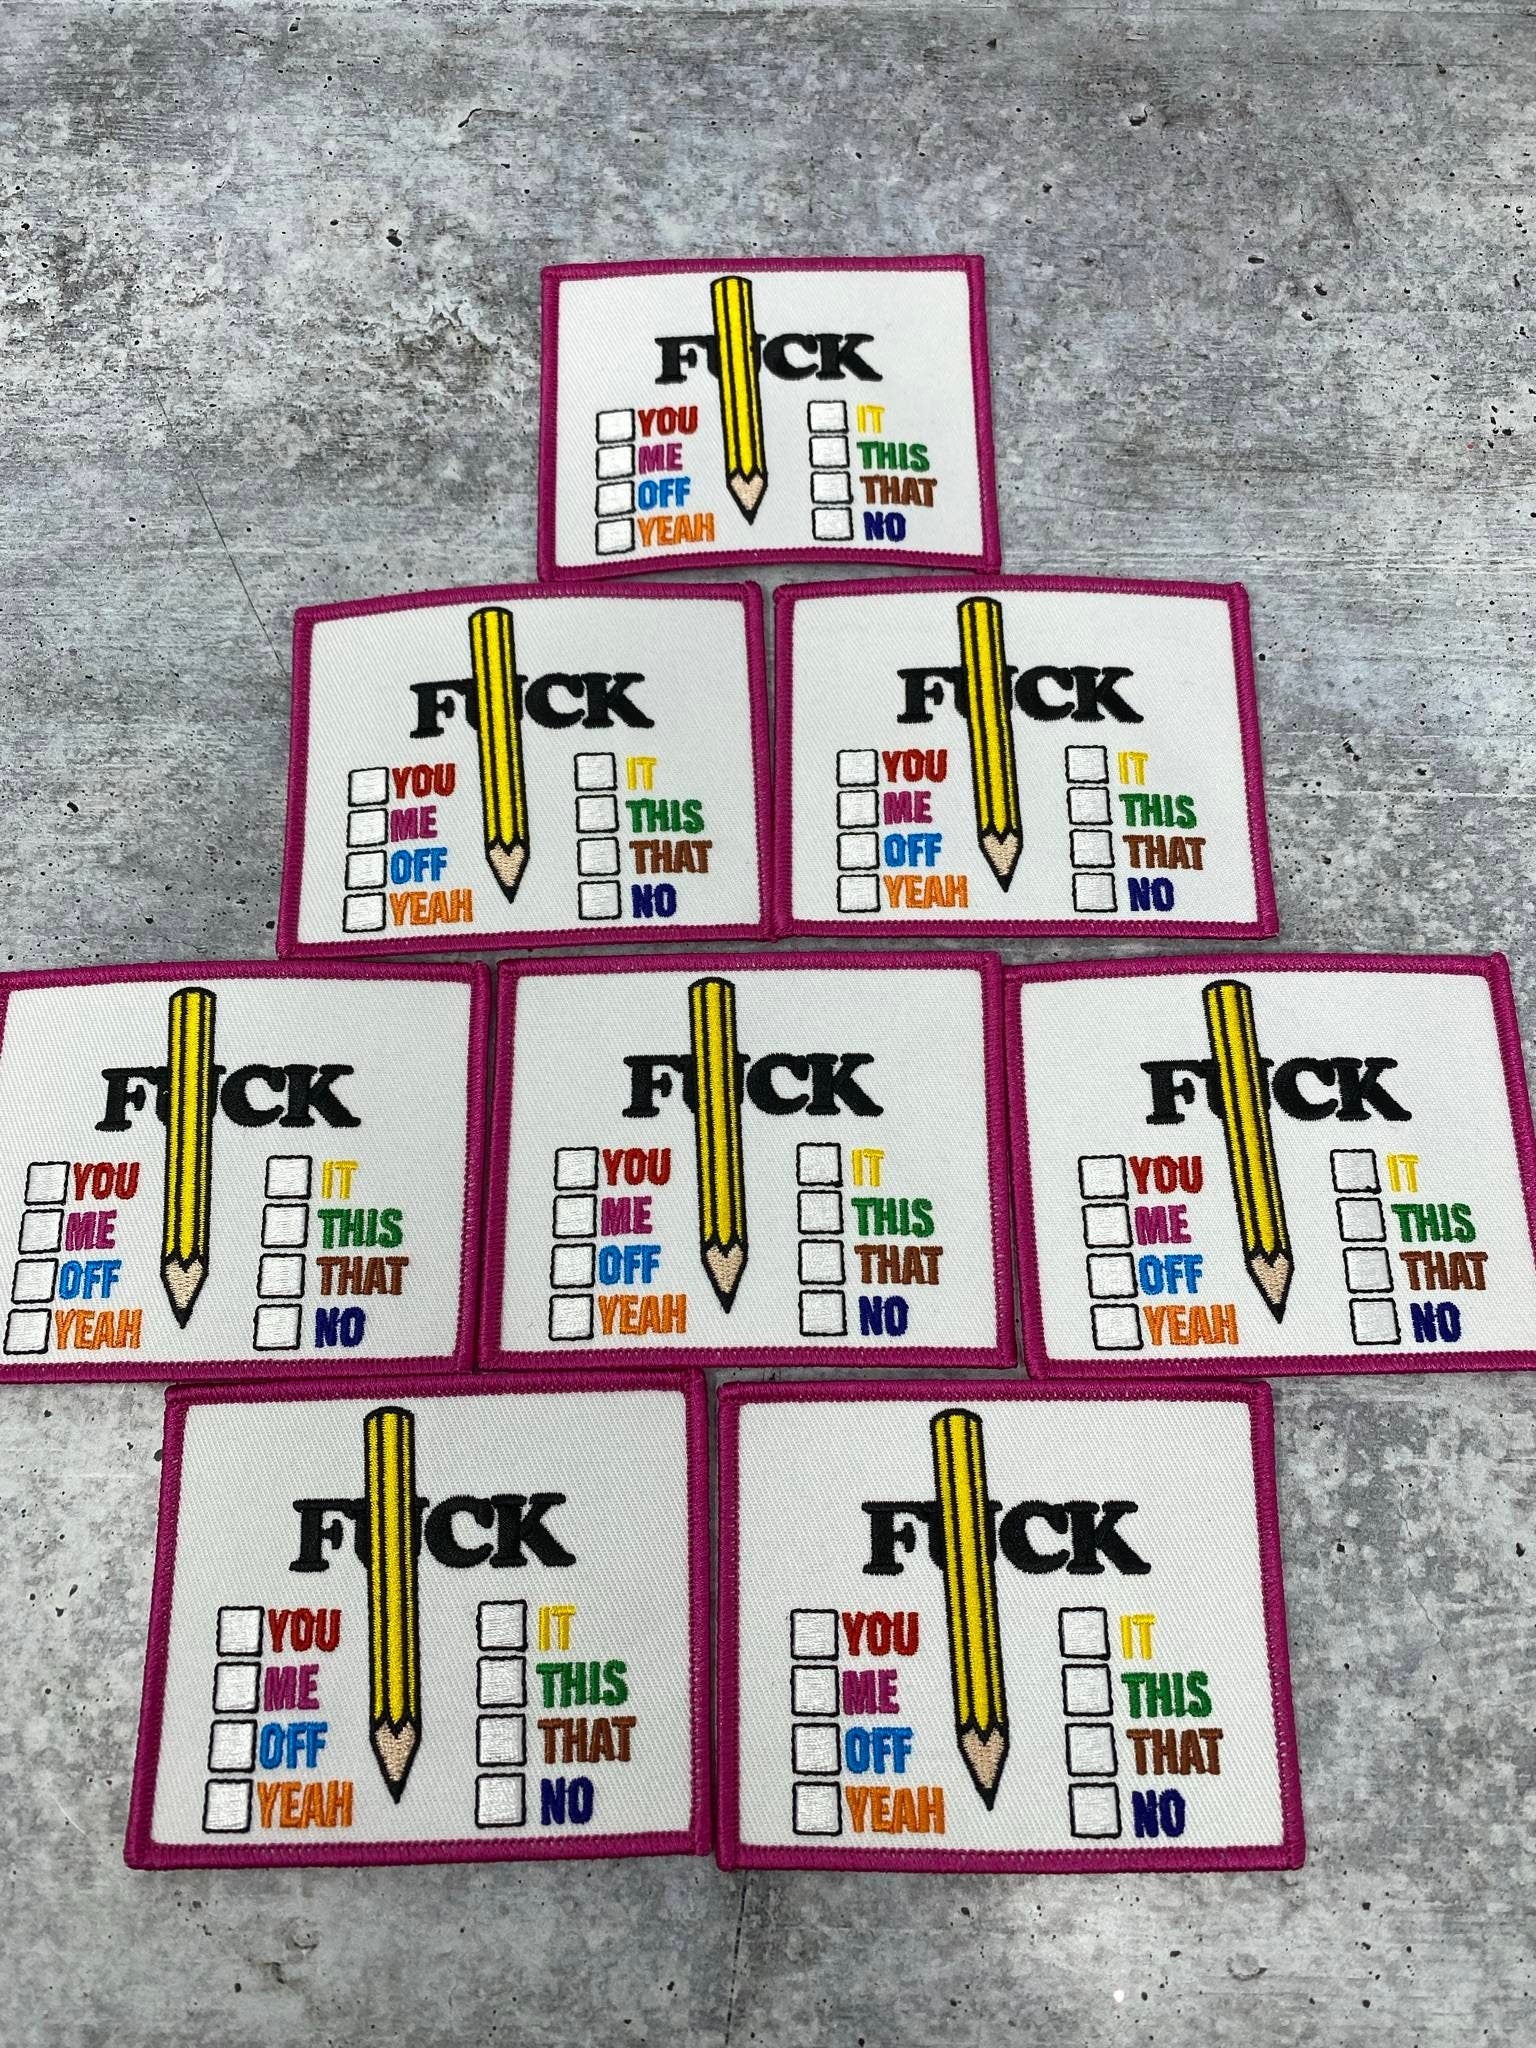 New Arrival, "F*ck: Choose One" Statement Patch, DIY Embroidered Applique Iron On Patch, Size 4", Hot Pink Border, Colorful Badge, 1-pc, DIY